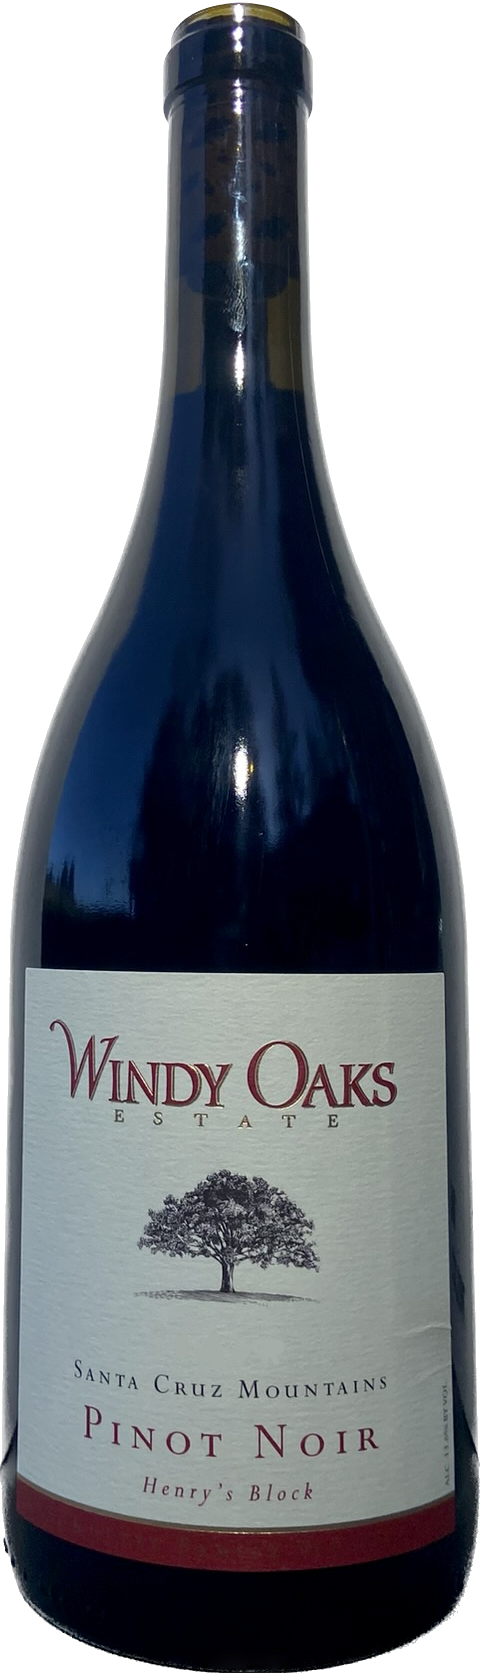 Product Image for 2020 Estate Pinot Noir, Limited Release, Henry's Block